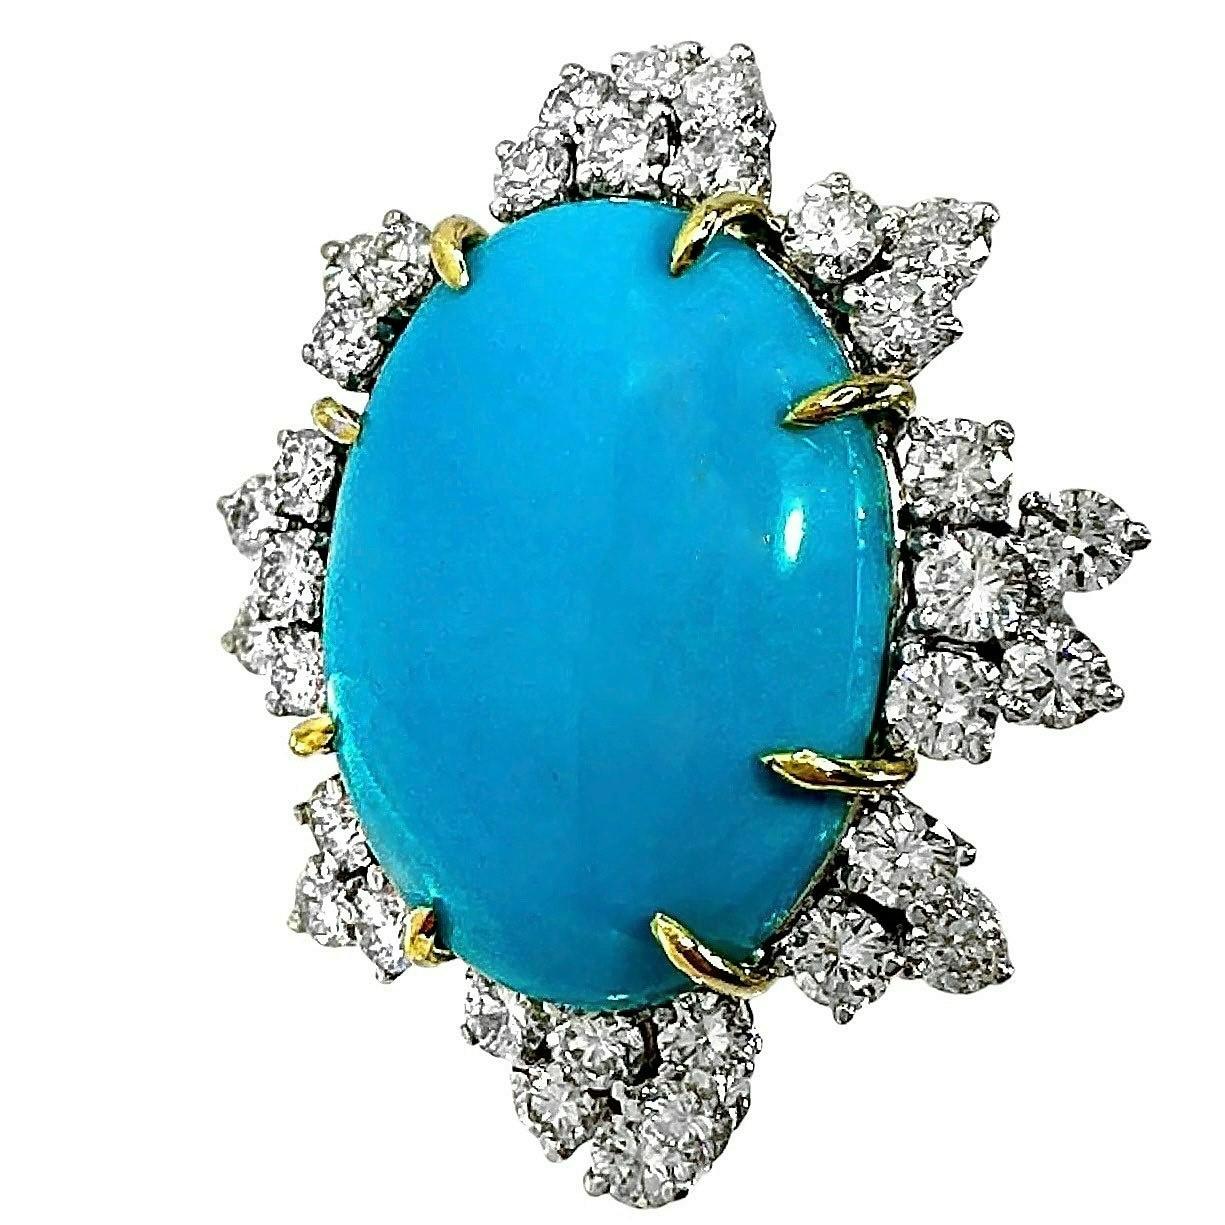 This extremely aesthetic, vintage cocktail ring makes a strong statement. With a length of over 1.5 inches and a width of 1.25 inches, it is impossible to miss.  The vivid blue natural turquoise cabochon measures 1 inch in length by 3/4 inch in